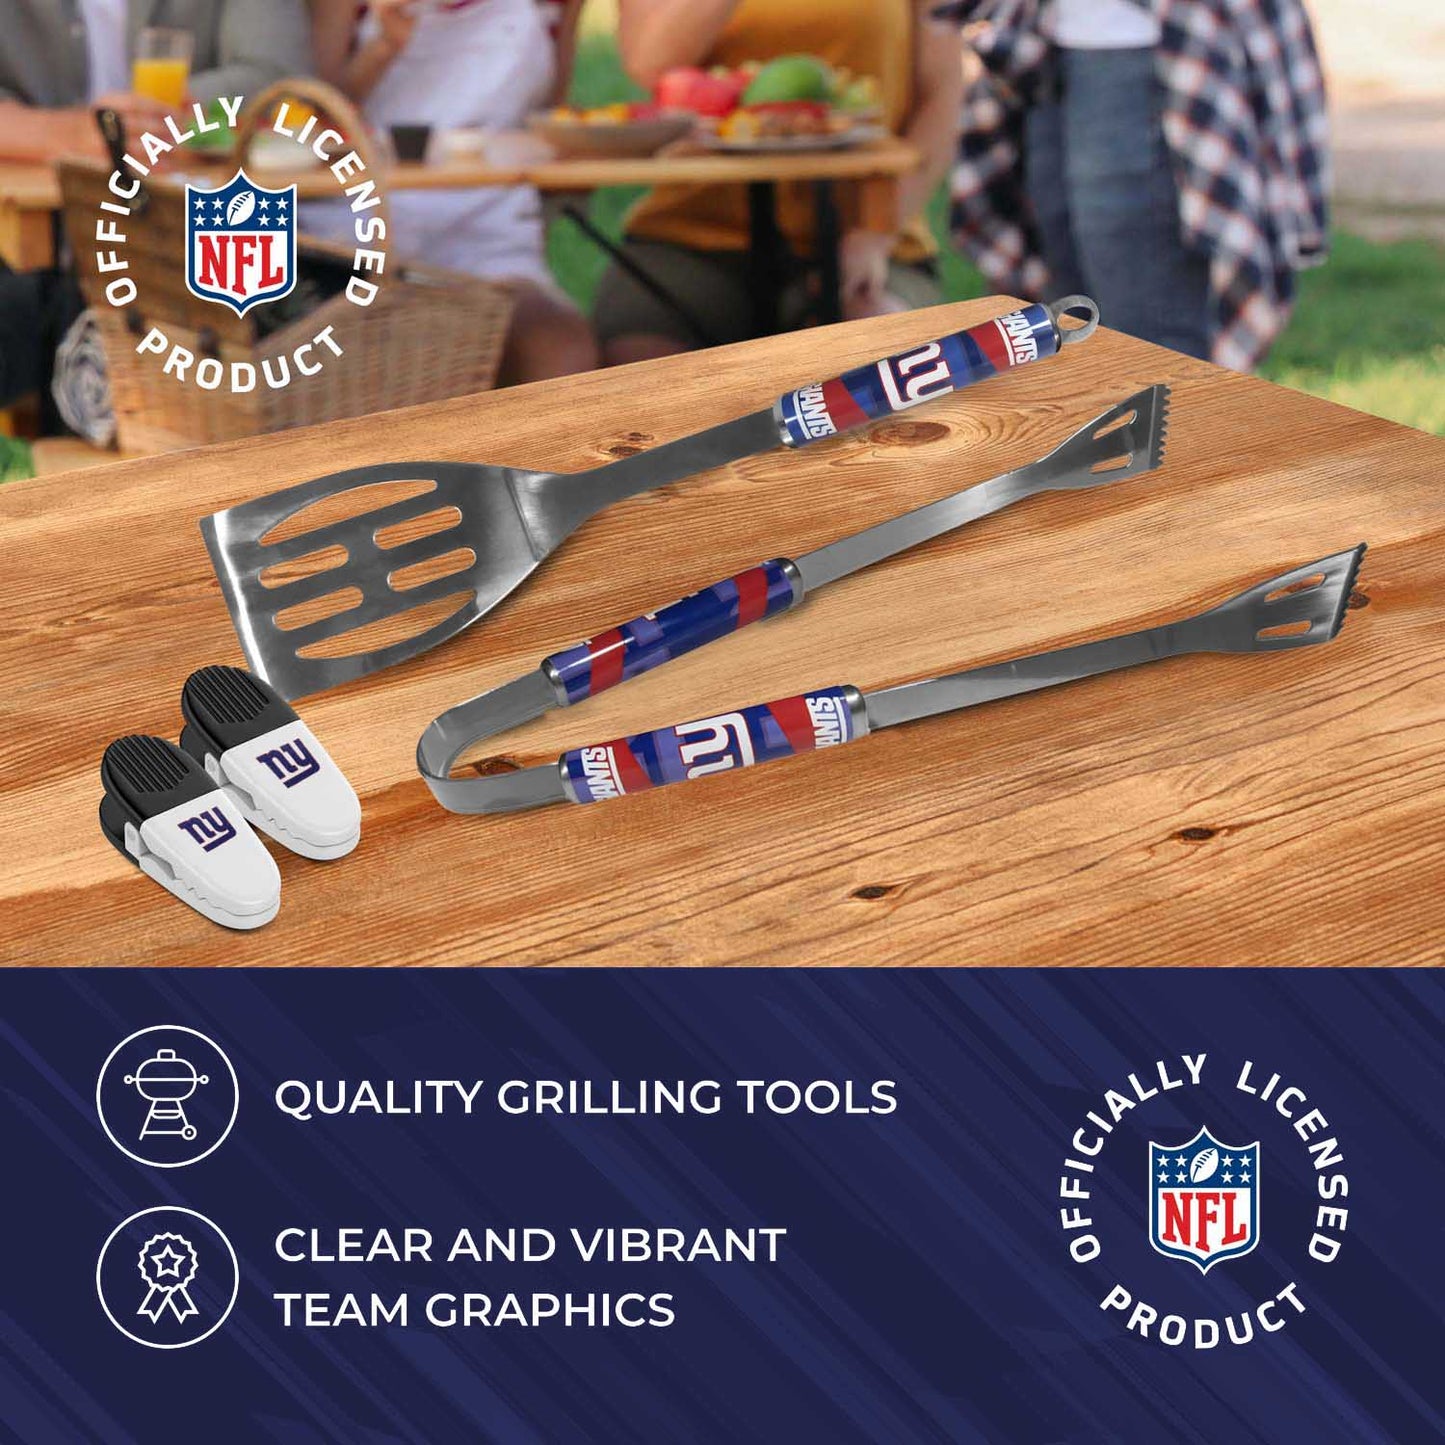 New York Giants NFL Two Piece Grilling Tools Set with 2 Magnet Chip Clips - Chrome